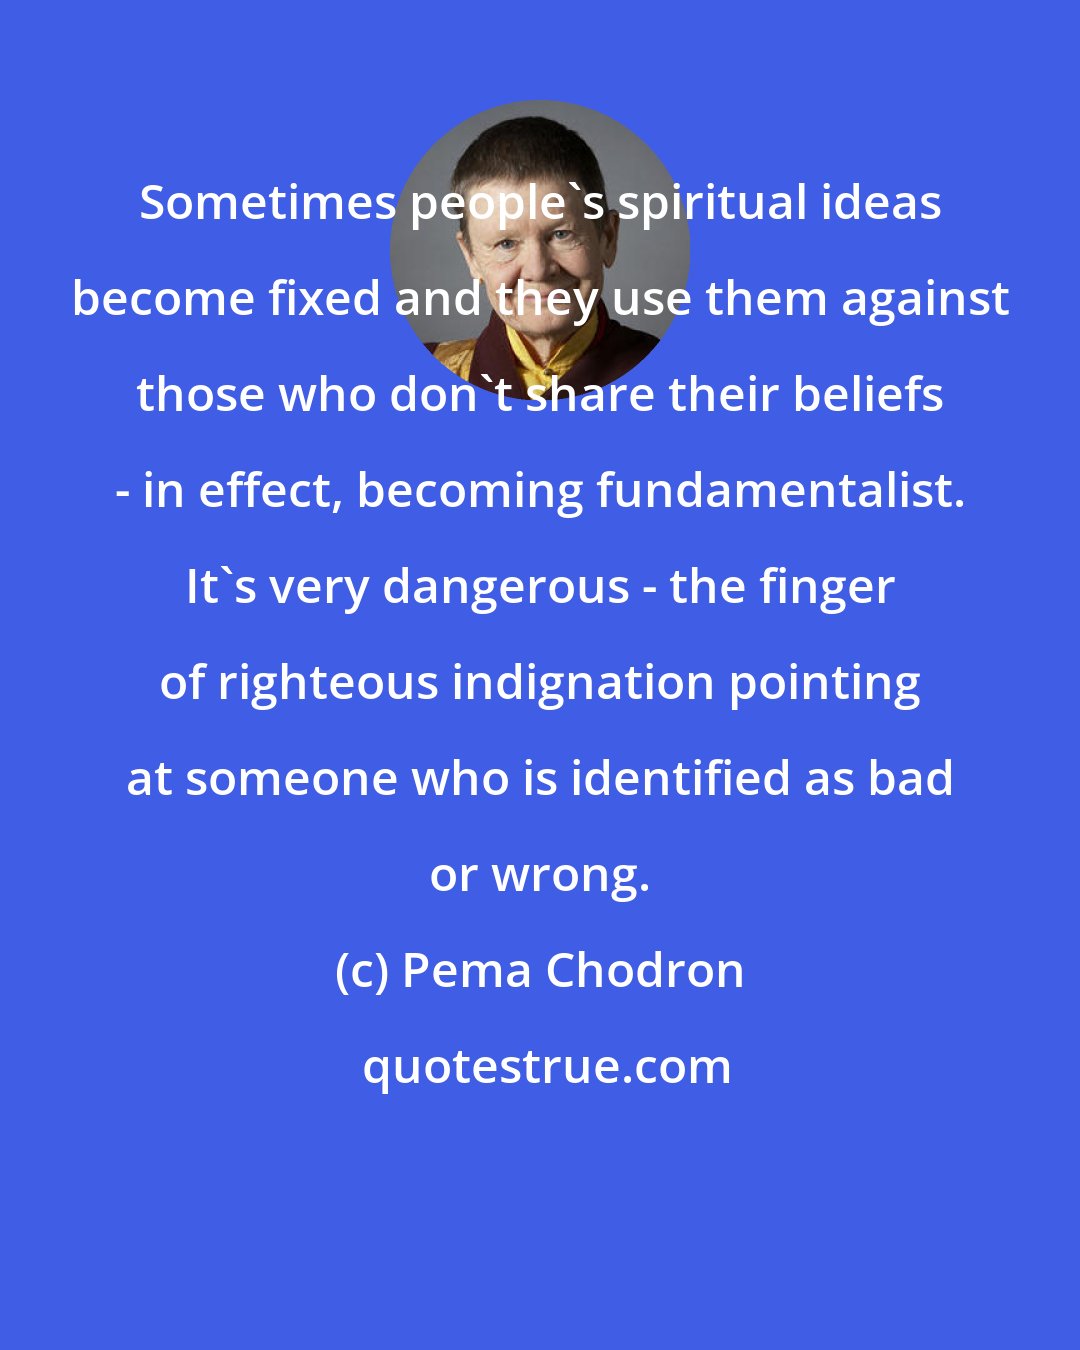 Pema Chodron: Sometimes people's spiritual ideas become fixed and they use them against those who don't share their beliefs - in effect, becoming fundamentalist. It's very dangerous - the finger of righteous indignation pointing at someone who is identified as bad or wrong.